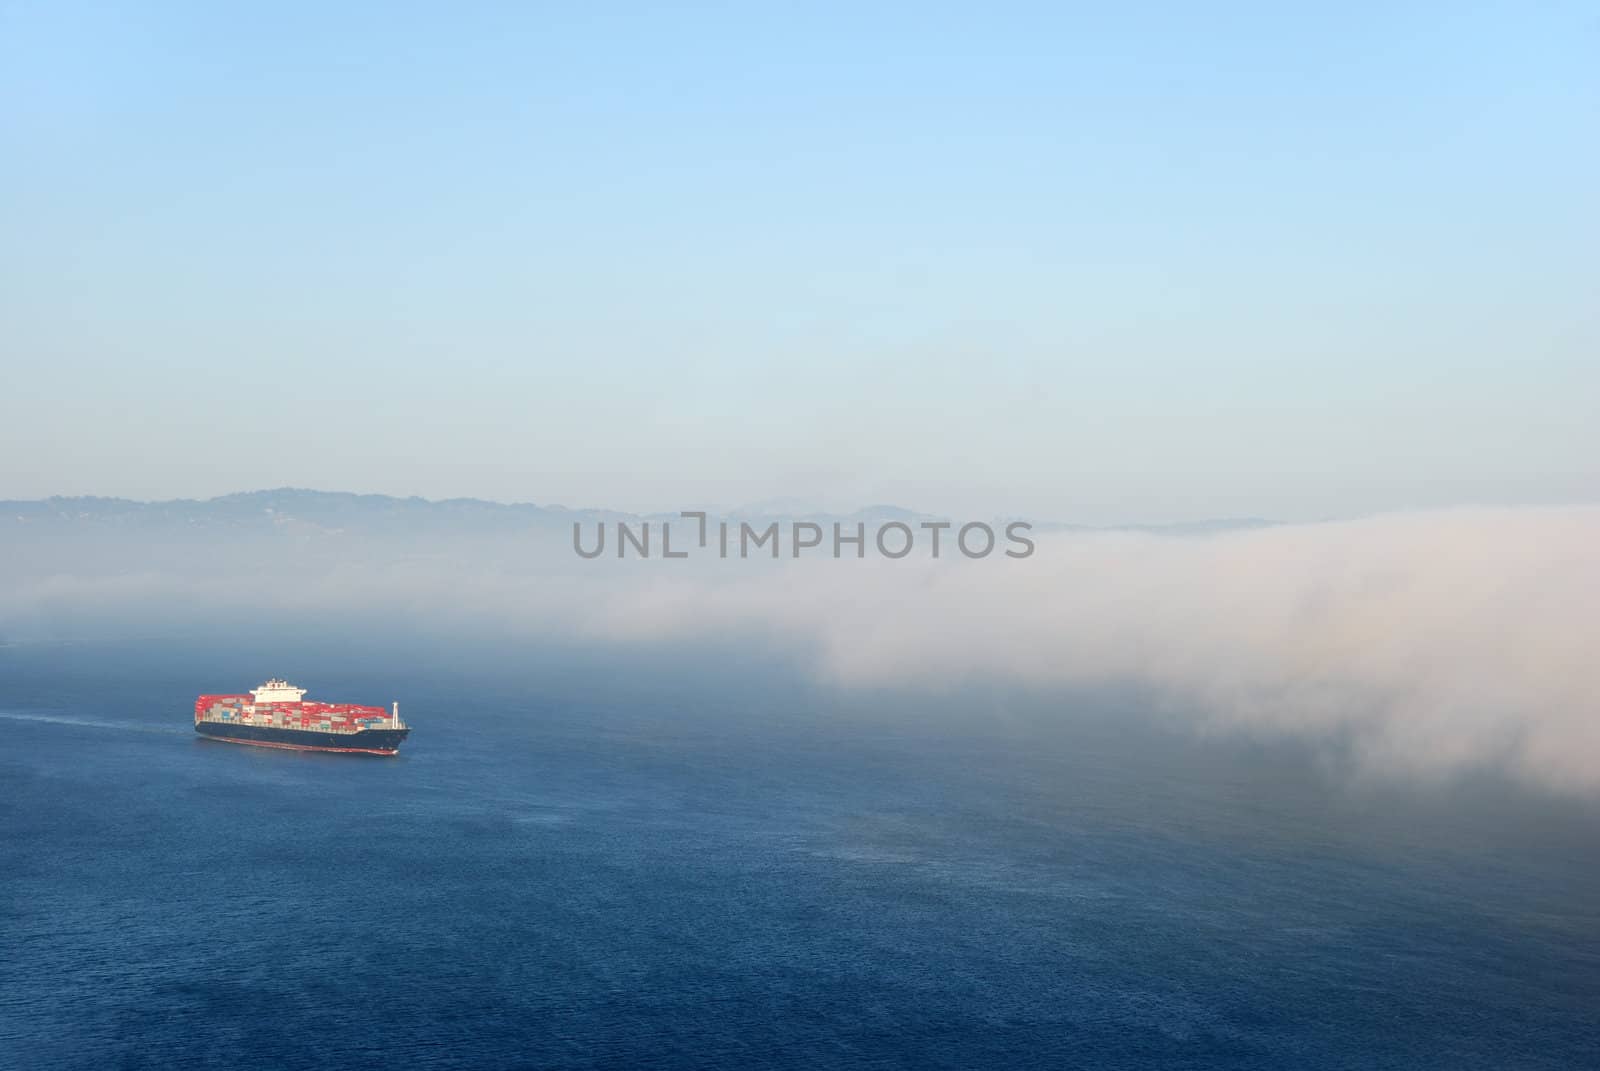 A tanker carrying containers flowing into the fog.